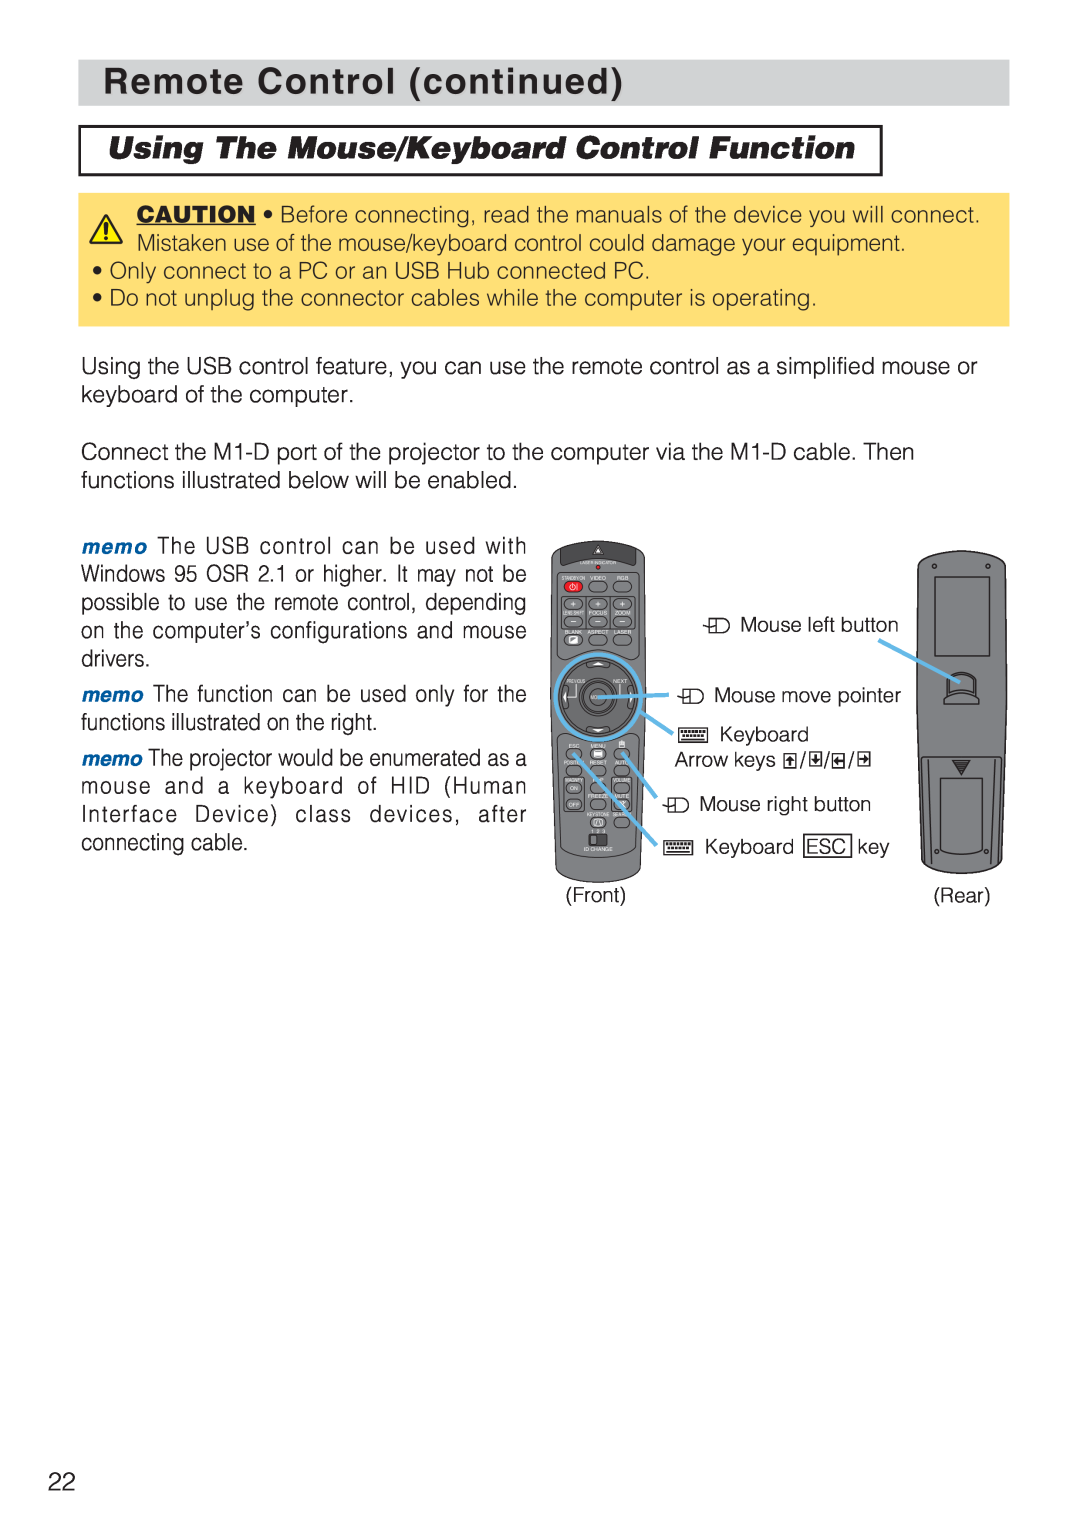 Toshiba TLP-SX3500 user manual Using The Mouse/Keyboard Control Function, Remote Control continued 